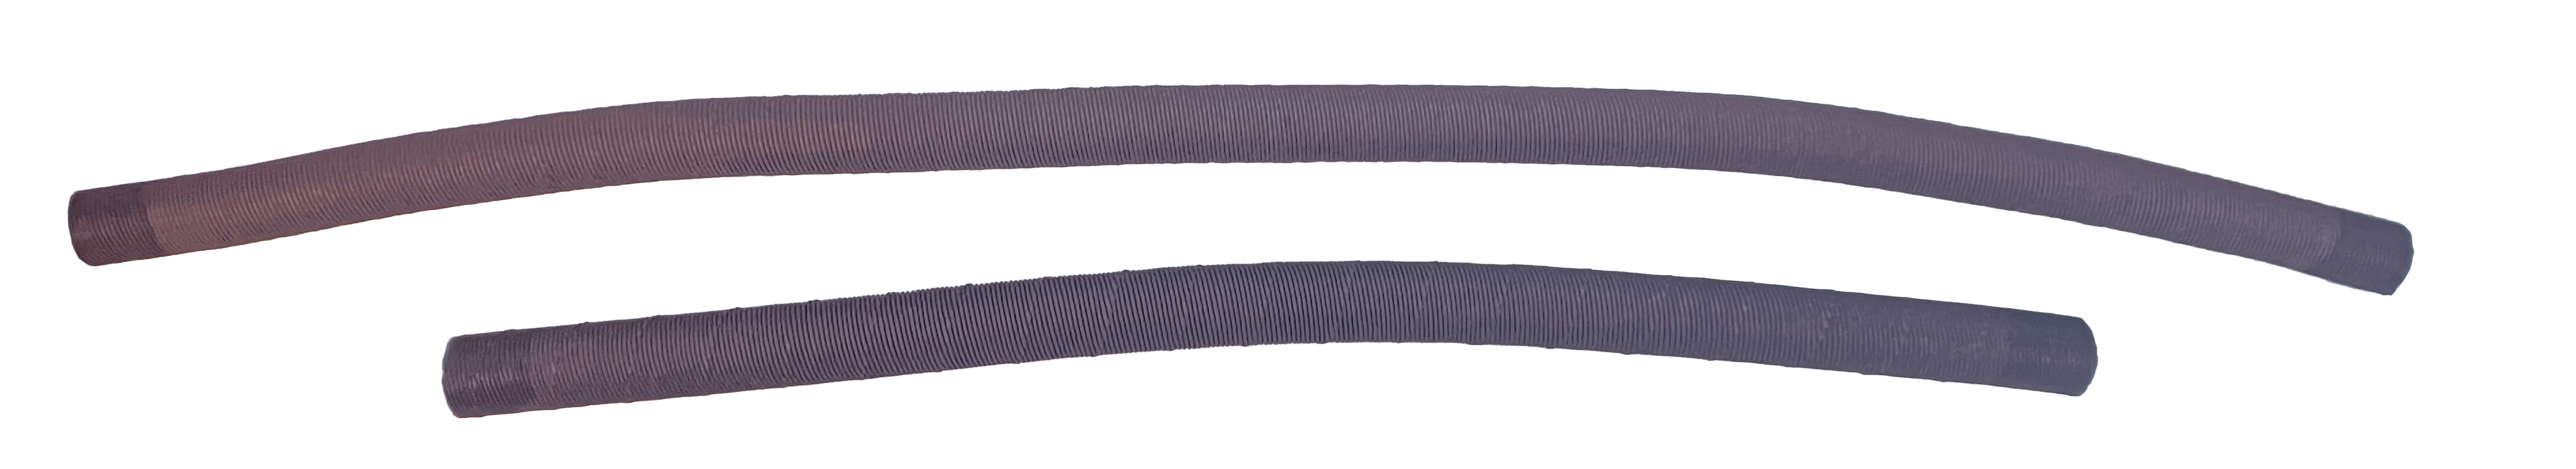 OE VW DEFROSTER VENT & AIR CLEANER HOSE - SET OF 2